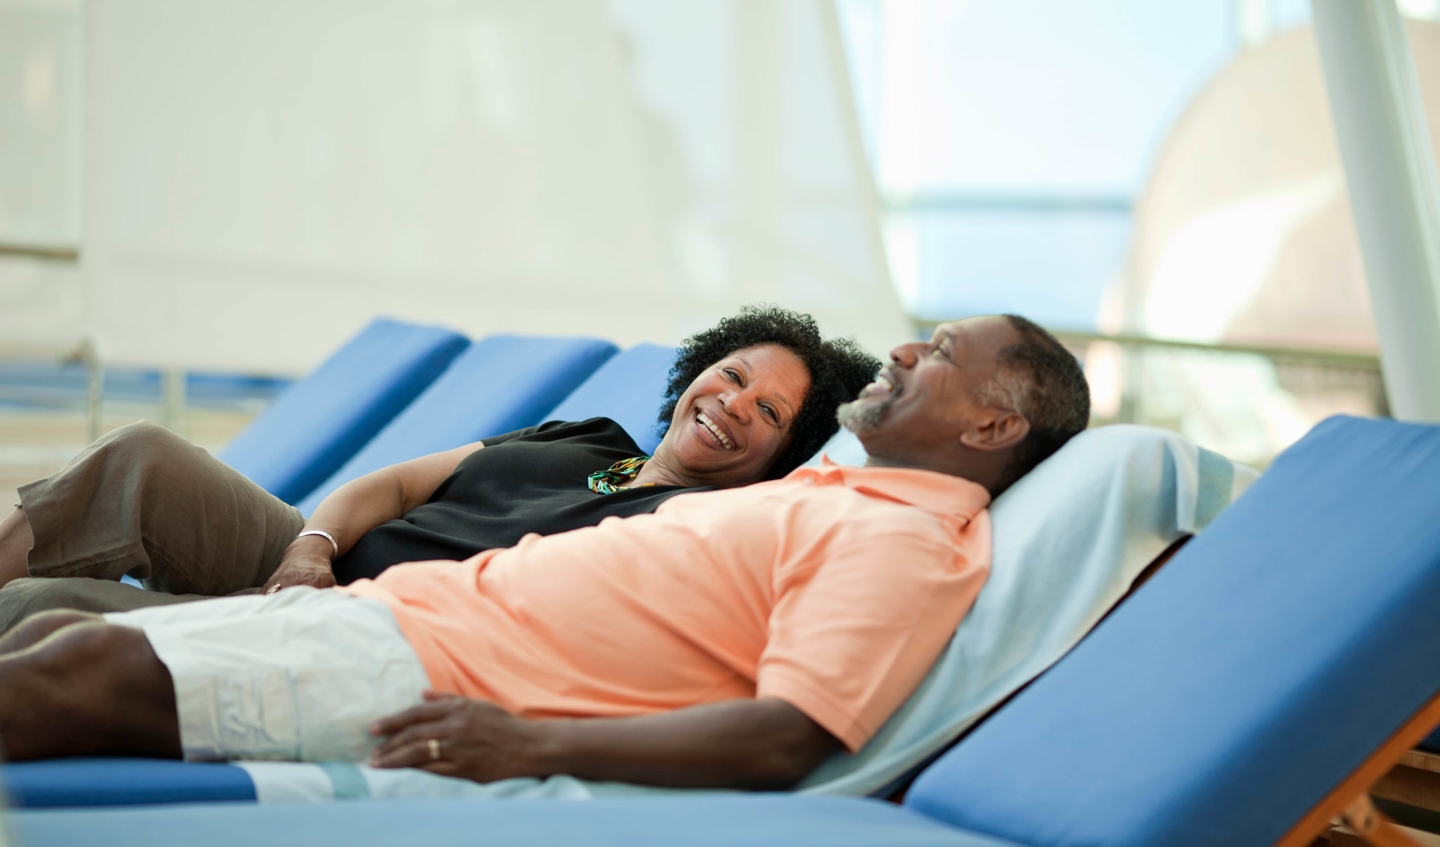 Two cruise passengers recline happily.